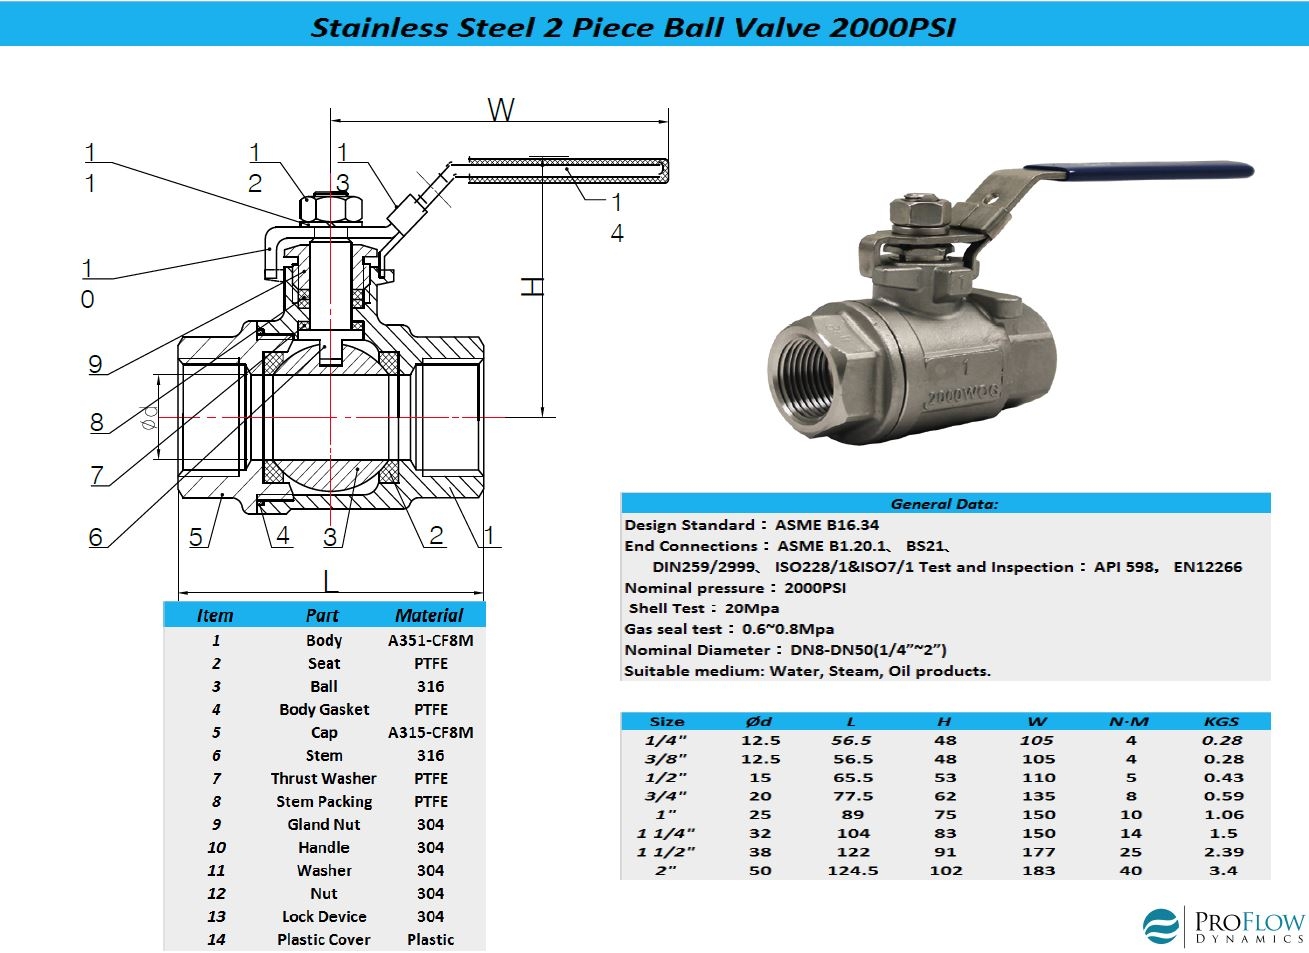 Specifications for a 2 piece ball valve